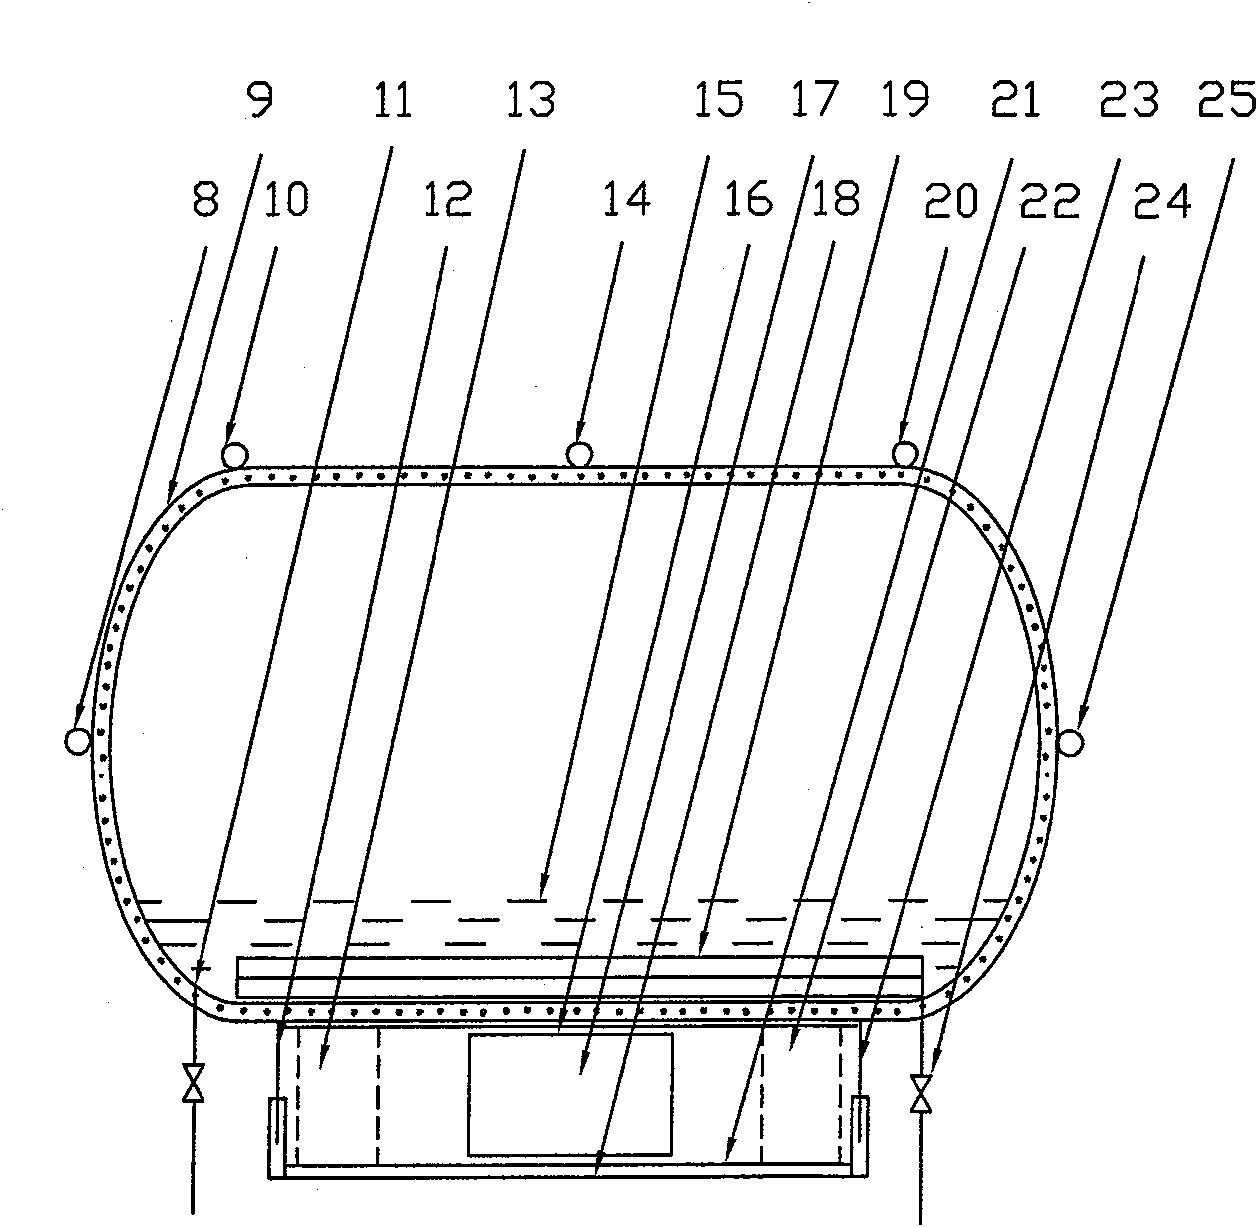 Method for producing fluidified fuel of marsh gas, and dedicated fluidified jar capable of measuring marsh gas